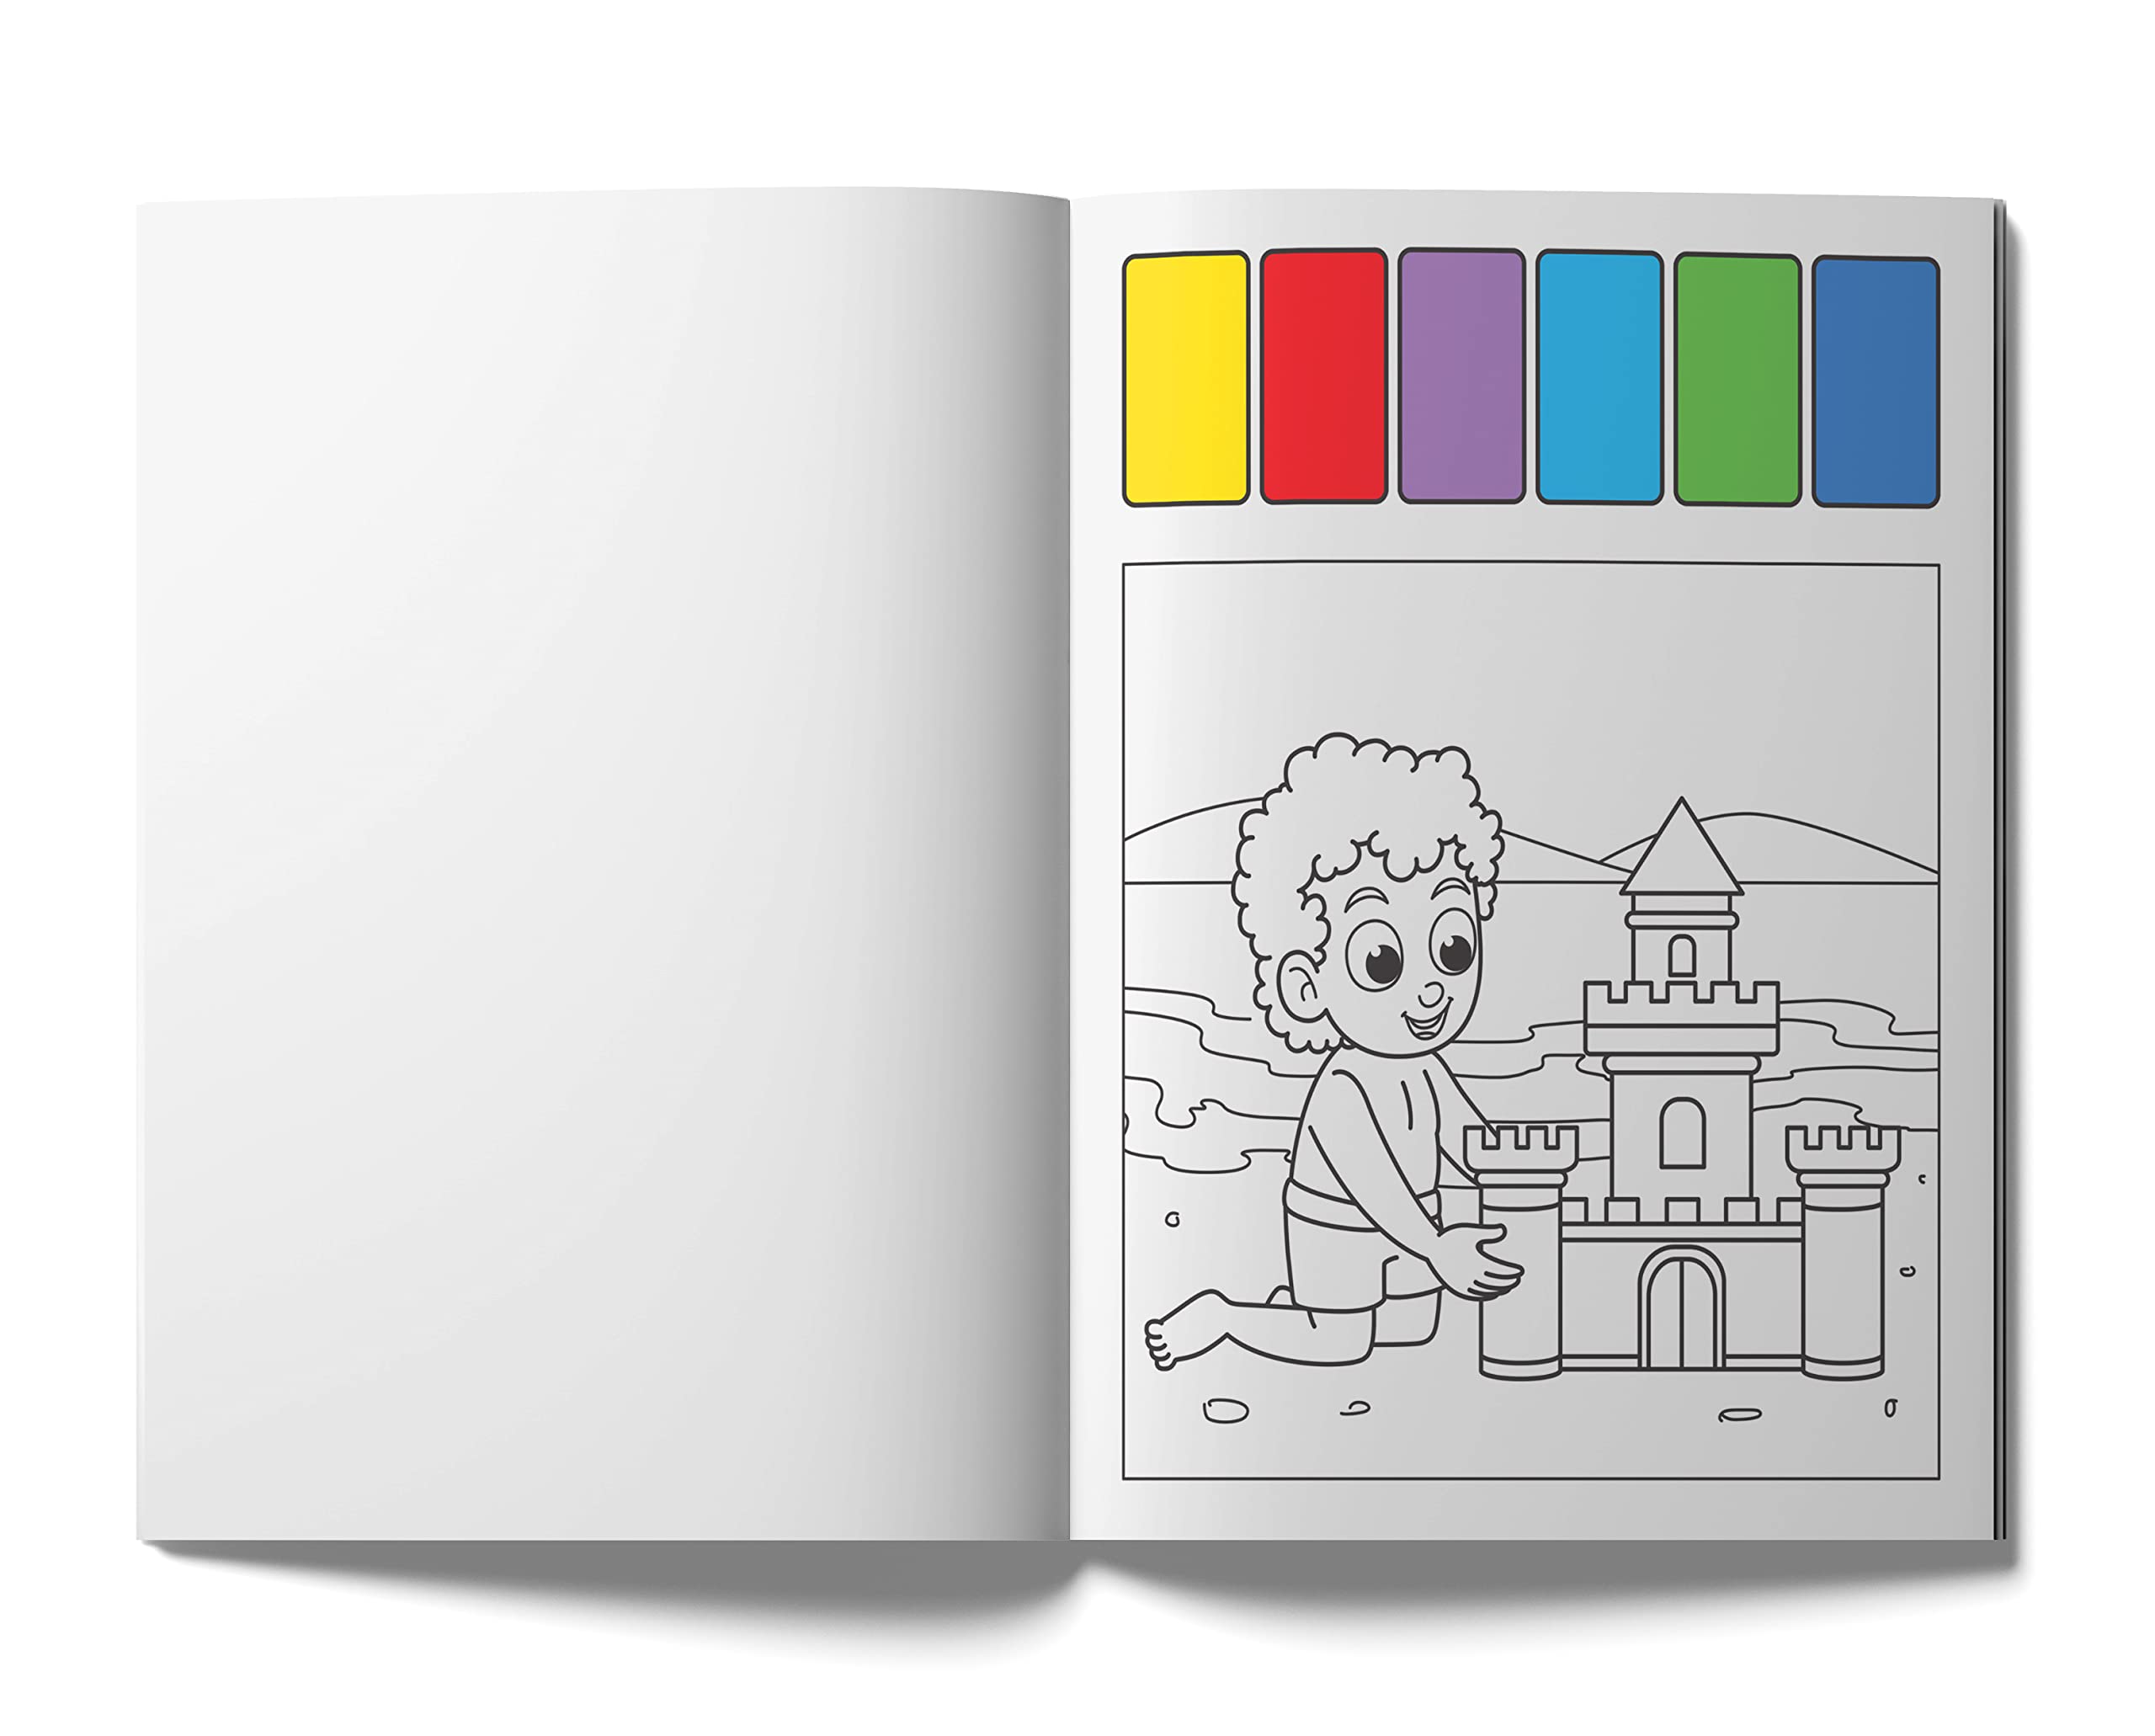 Pick and Paint Beach Fun Coloring Activity Book